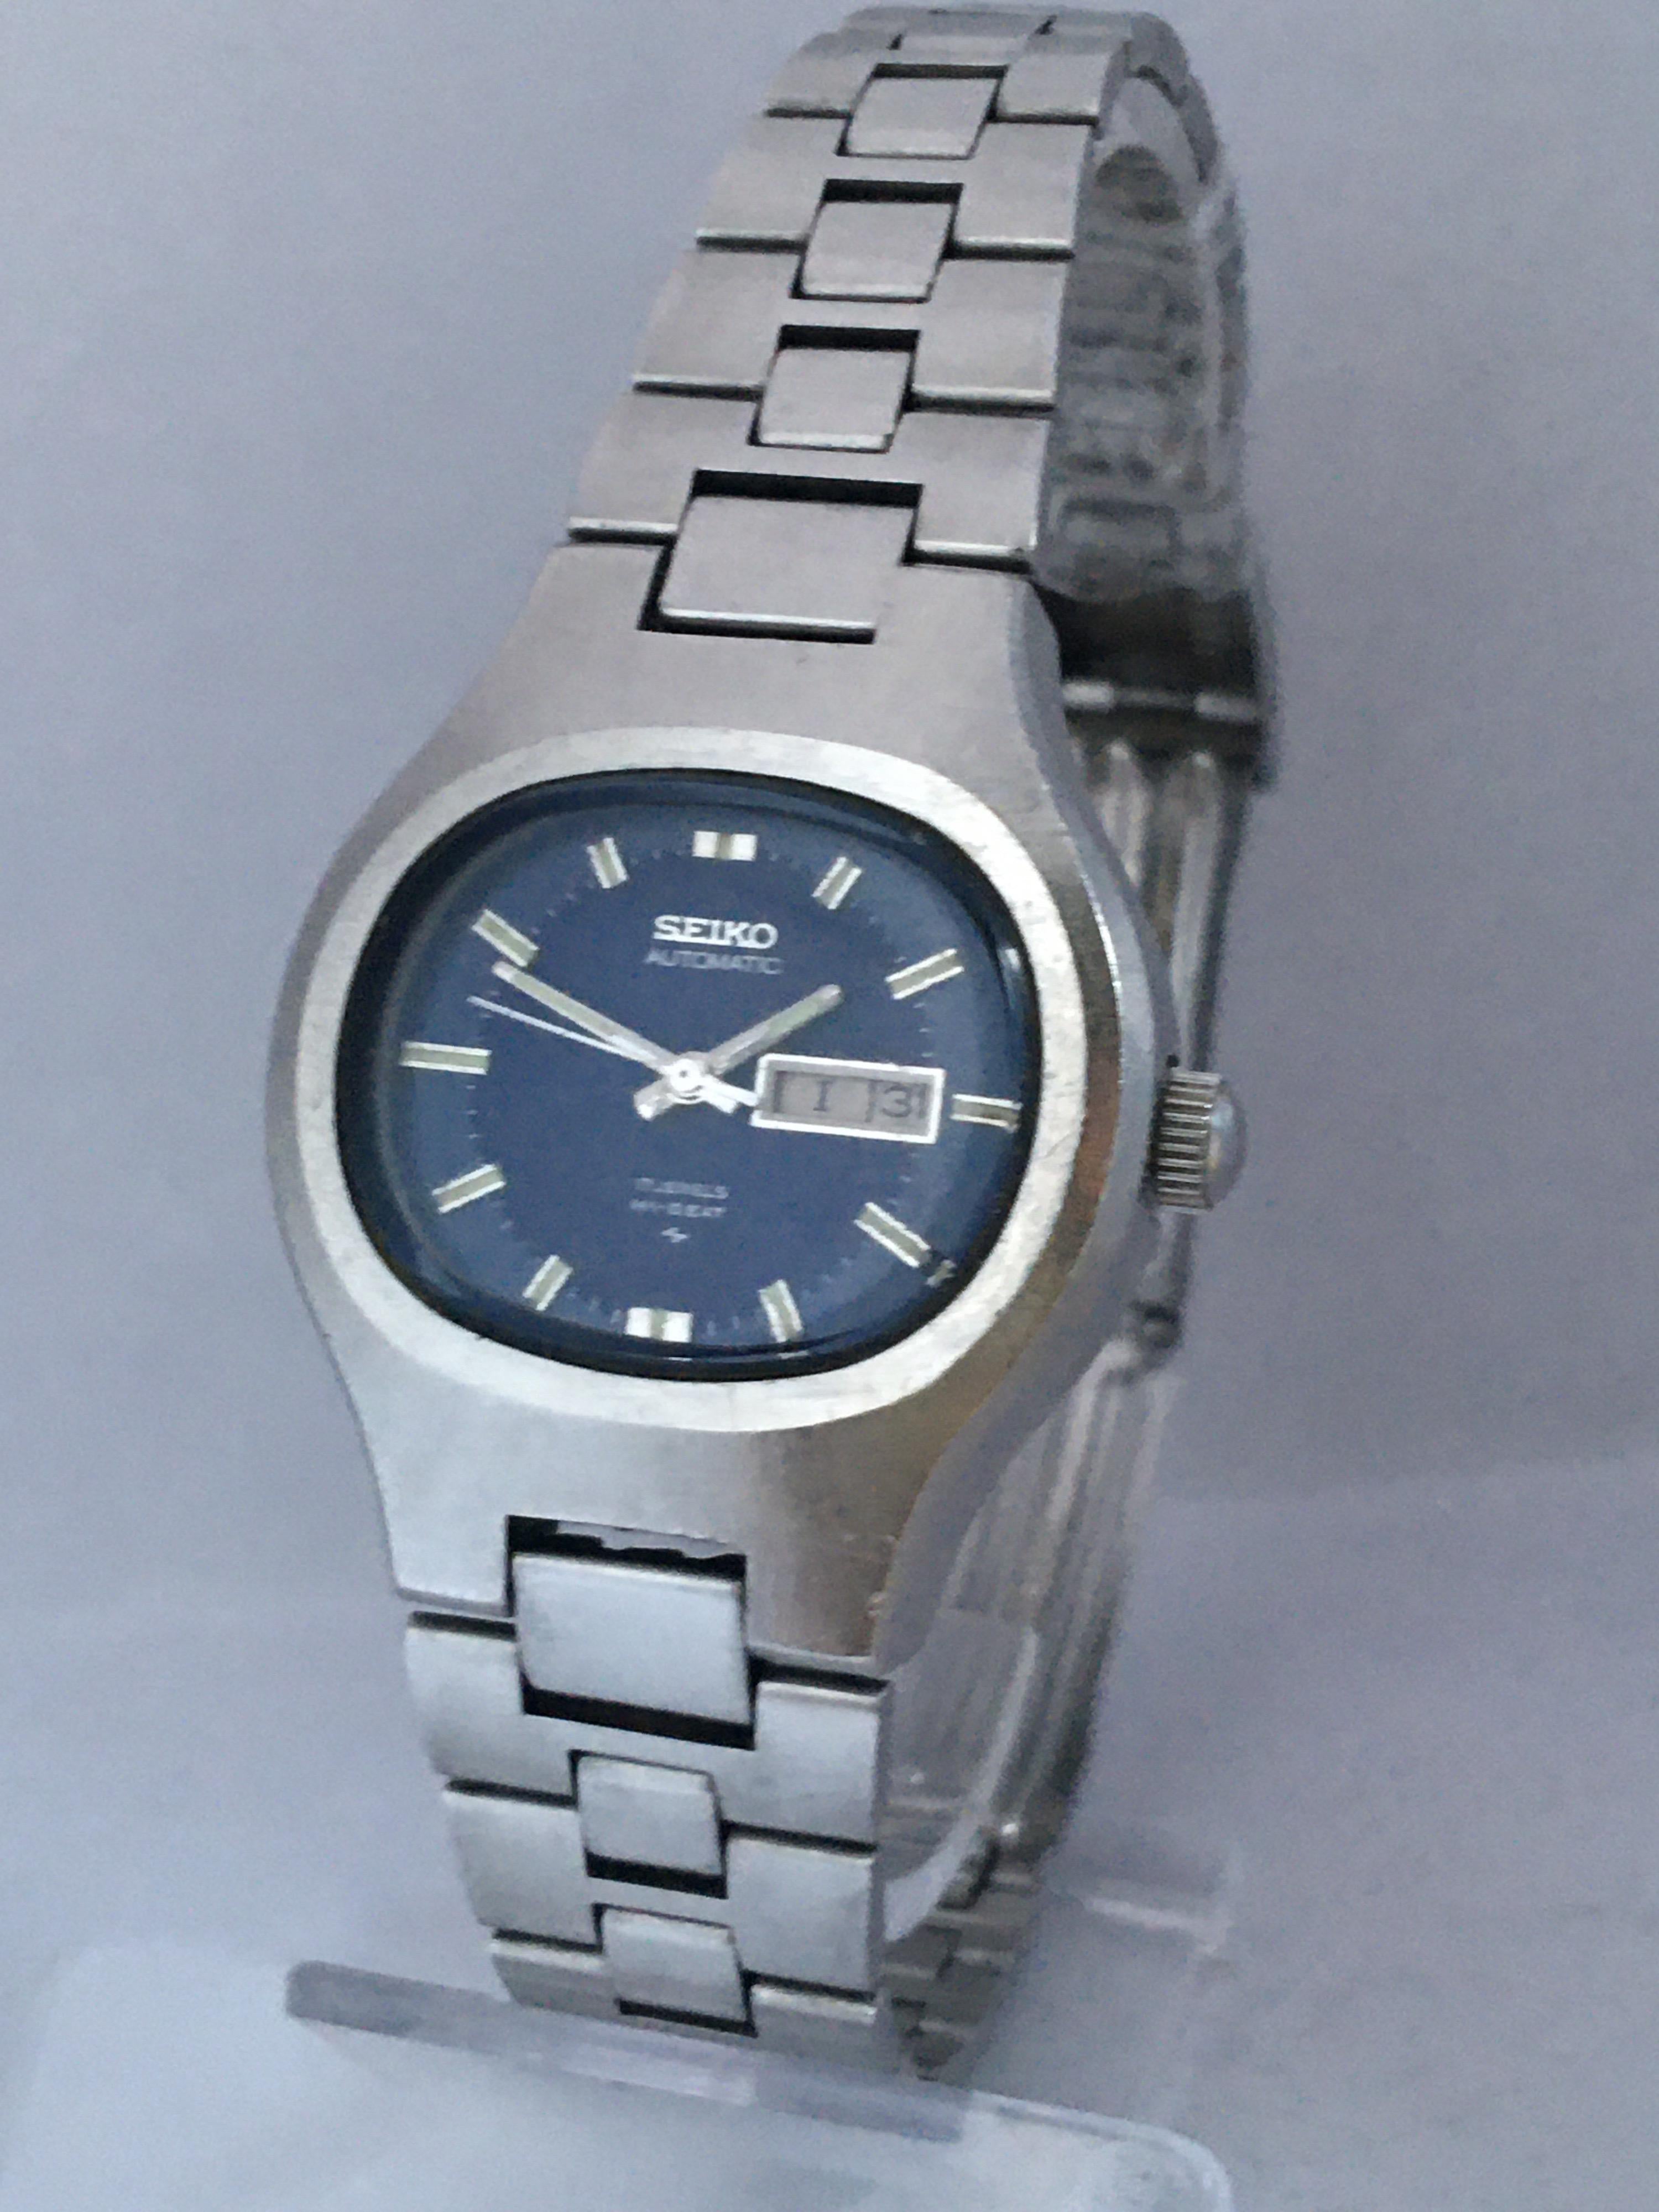 This beautiful vintage mechanical/ automatic watch is in good working condition and it is running well, visible signs of ageing and wear with small and light scratches on the glass, on the watch case and its stainless Steel strap as shown. 

Please